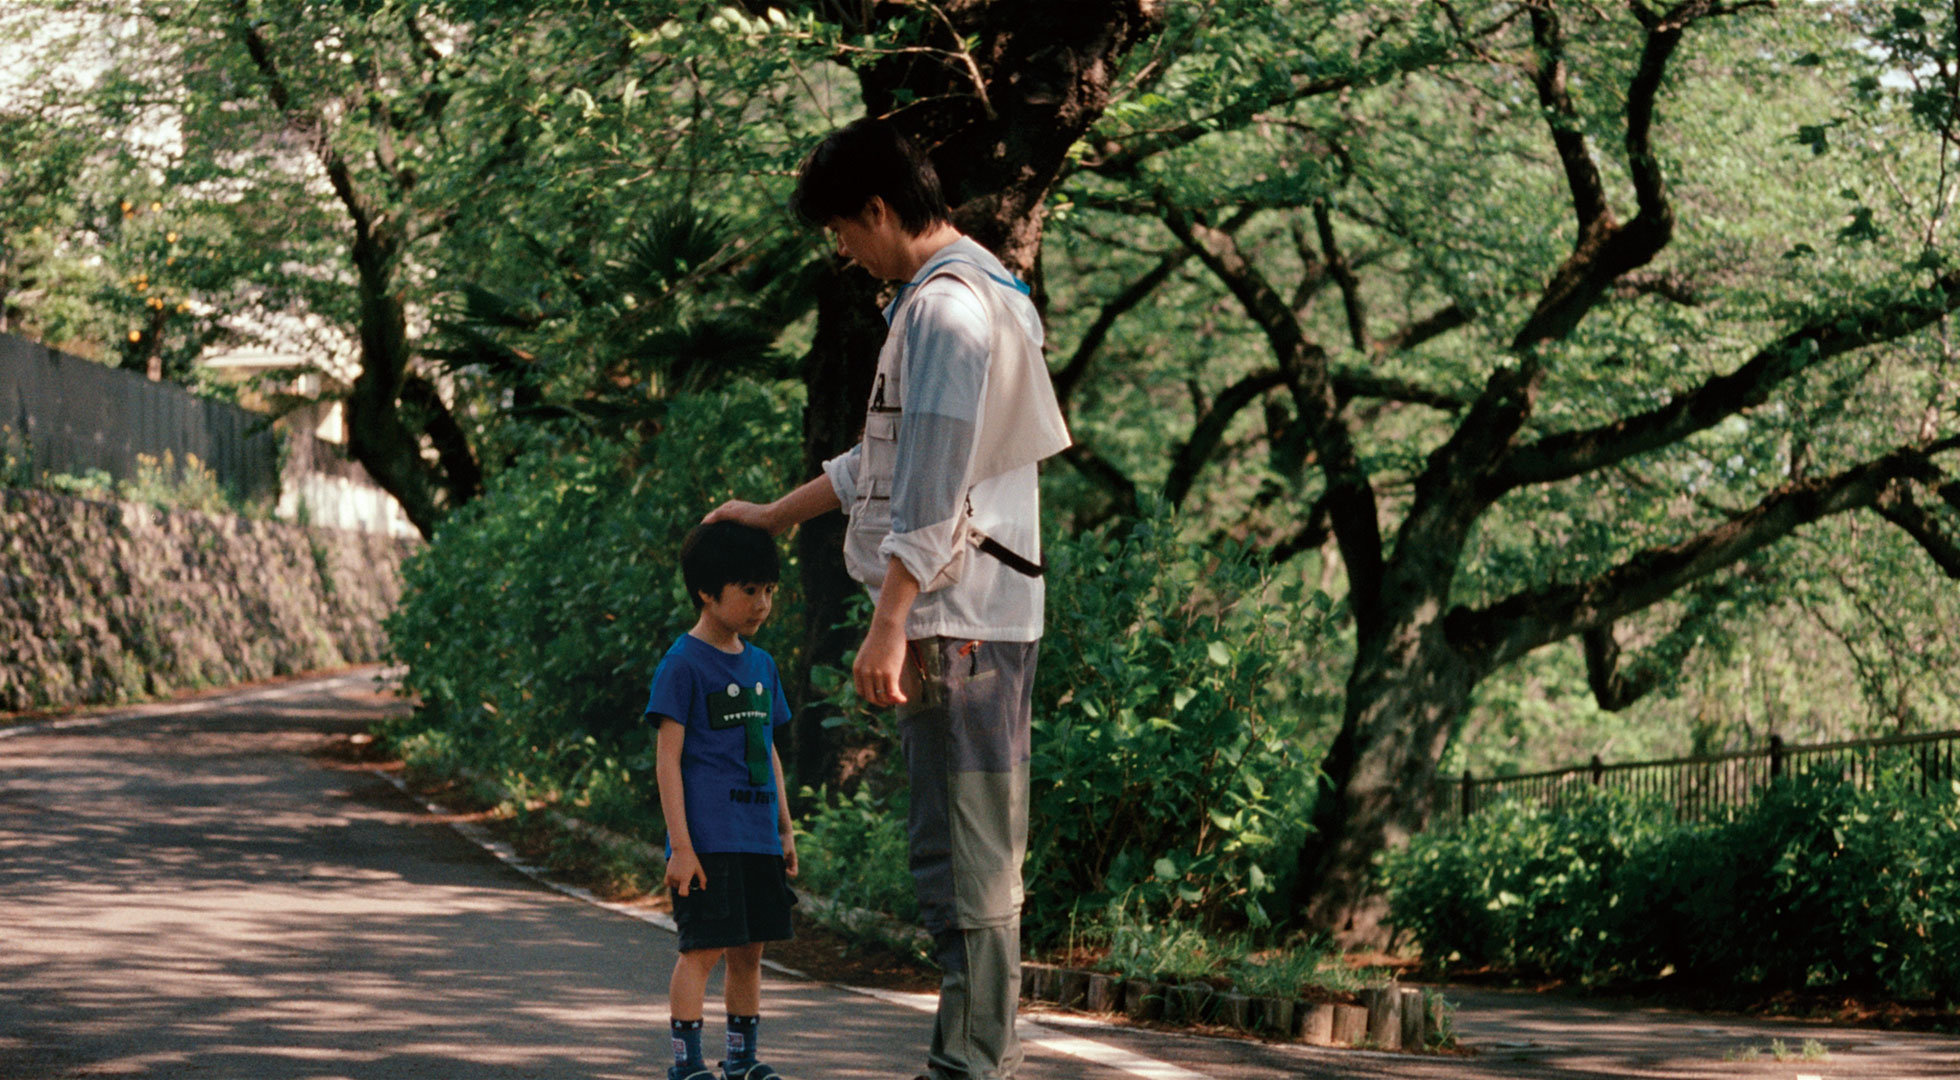 donnie casillas recommends japanese mother son movies pic